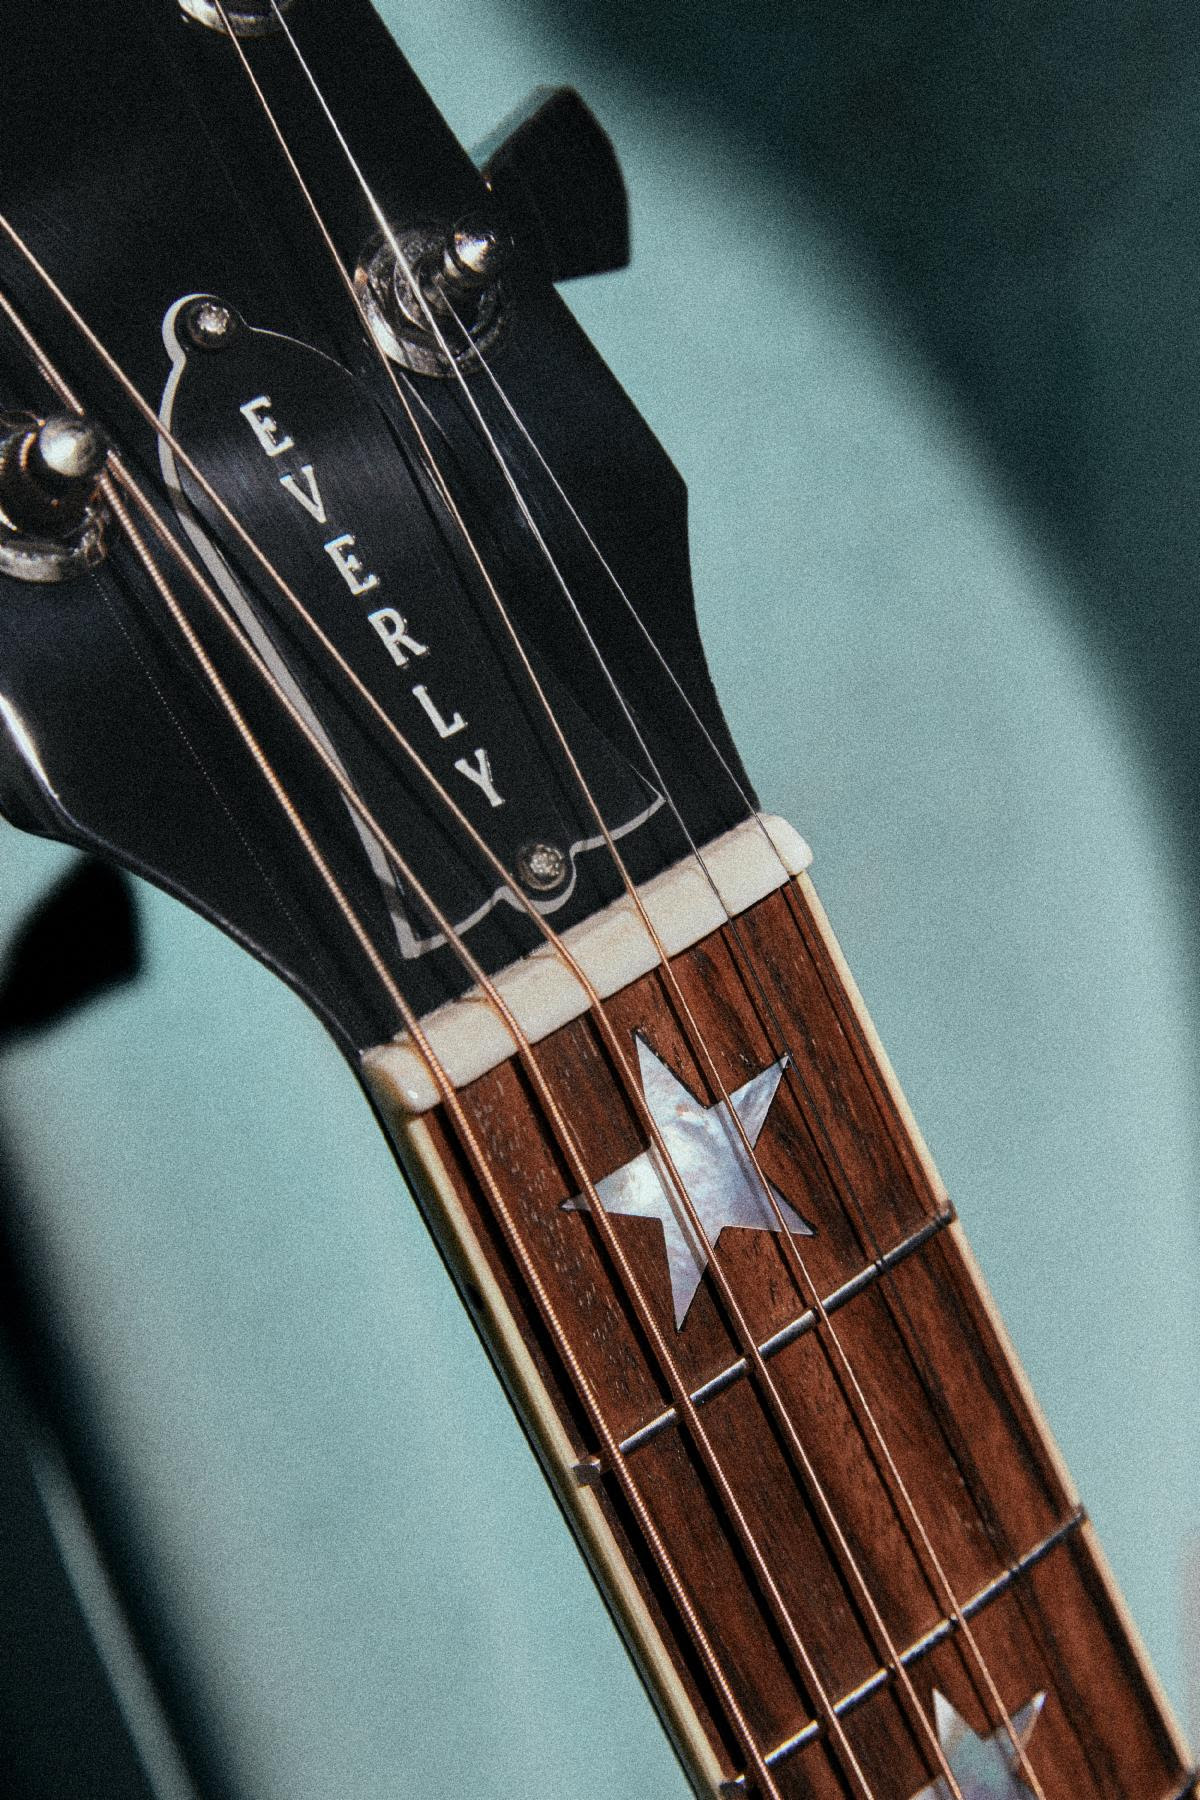 Gibson Everly Brothers J-180 mother of pearl star inlays on the fretboard and headstock.